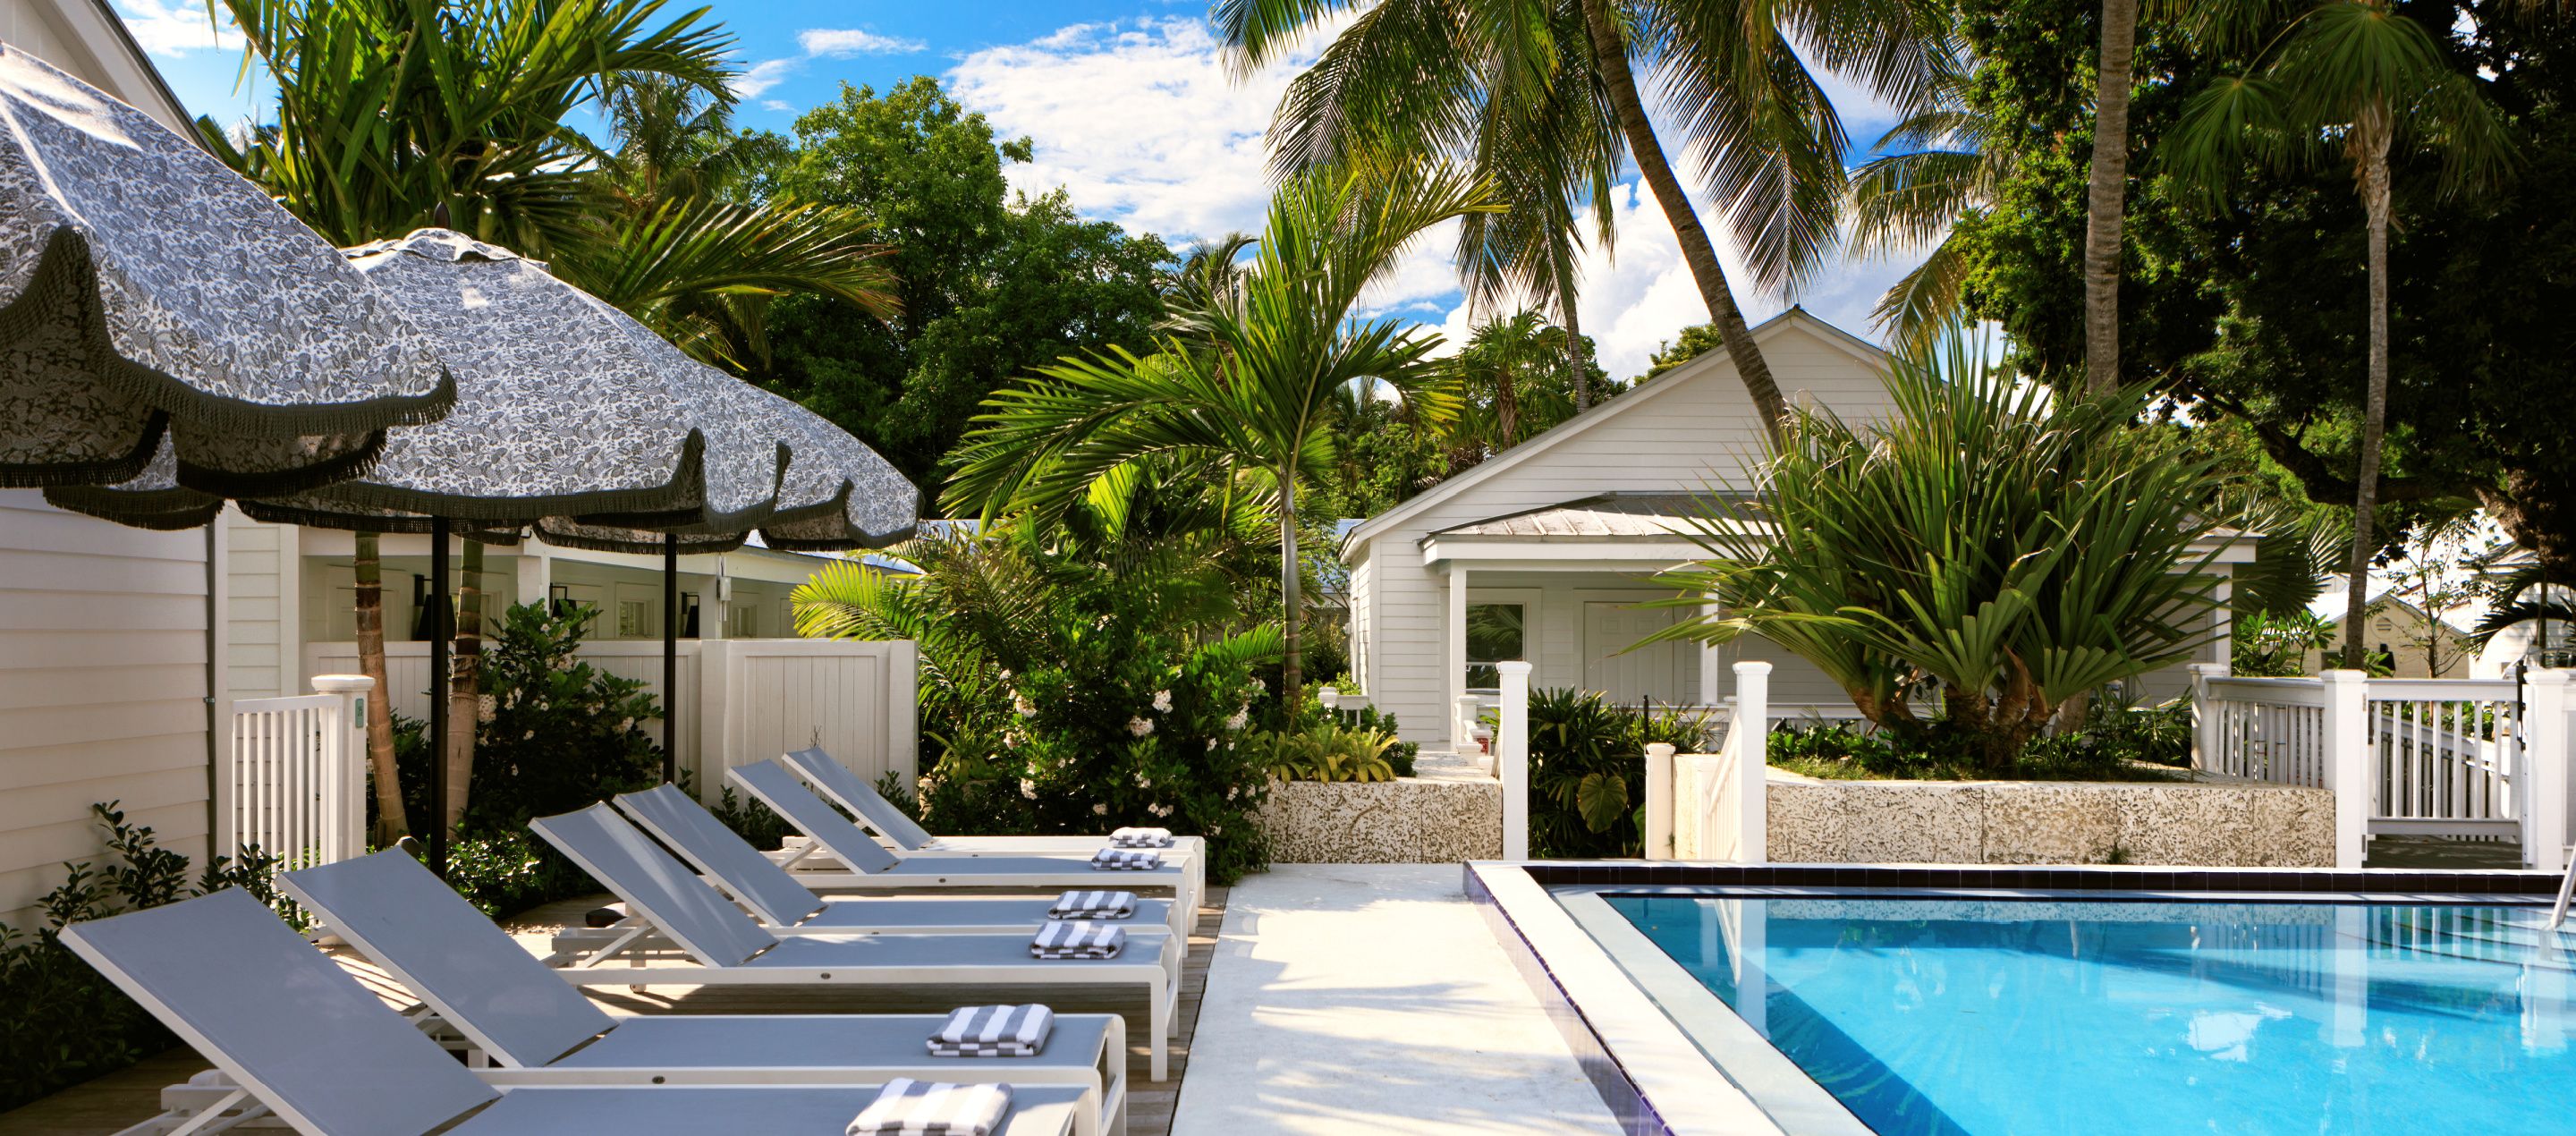 Sparkling outdoor pool and lounge chairs with umbrellas in key west